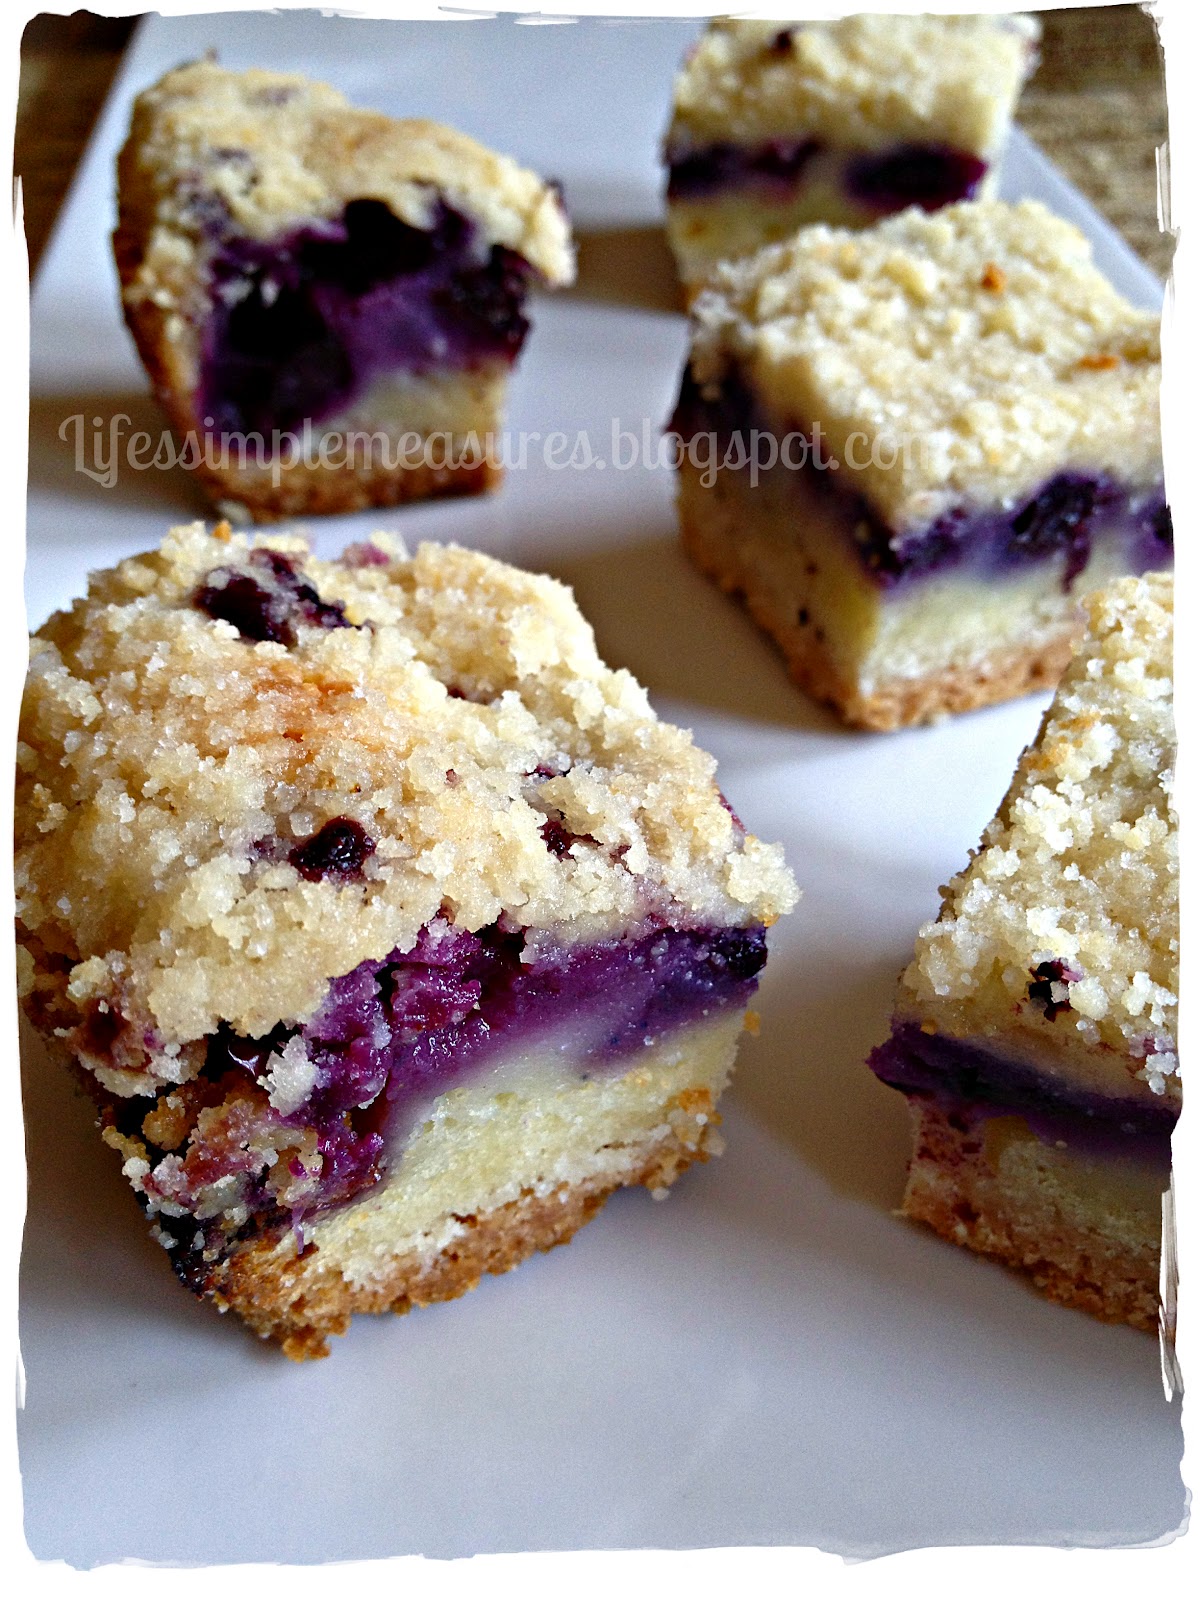 Life's Simple Measures: Blueberry Pie Bars